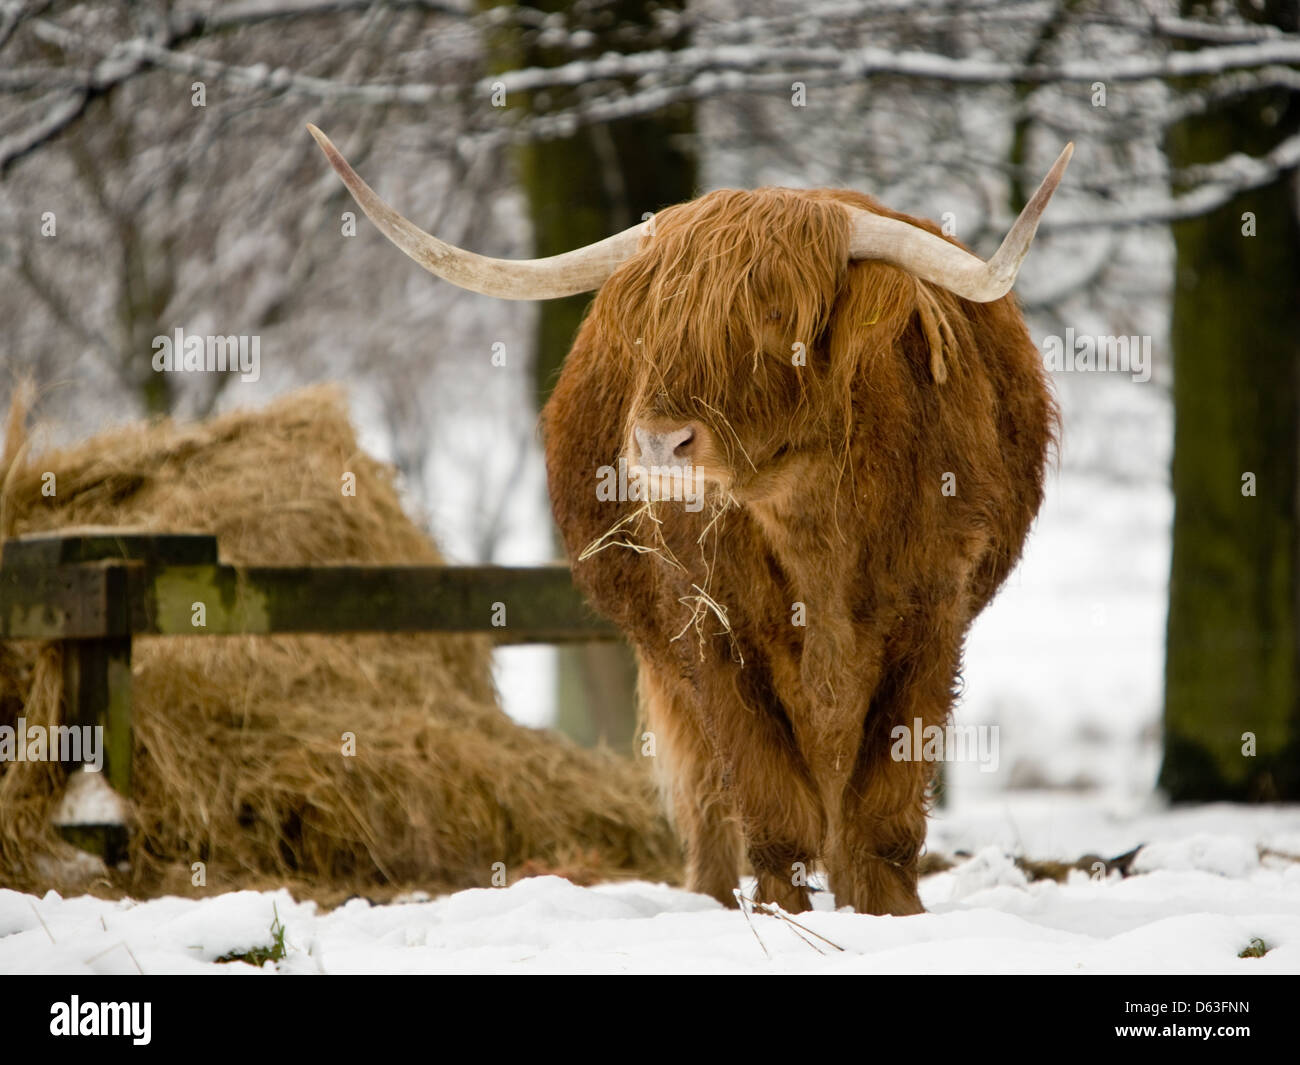 kyloe,Highland cattle feeding on grass in winter with snow,front view Stock Photo